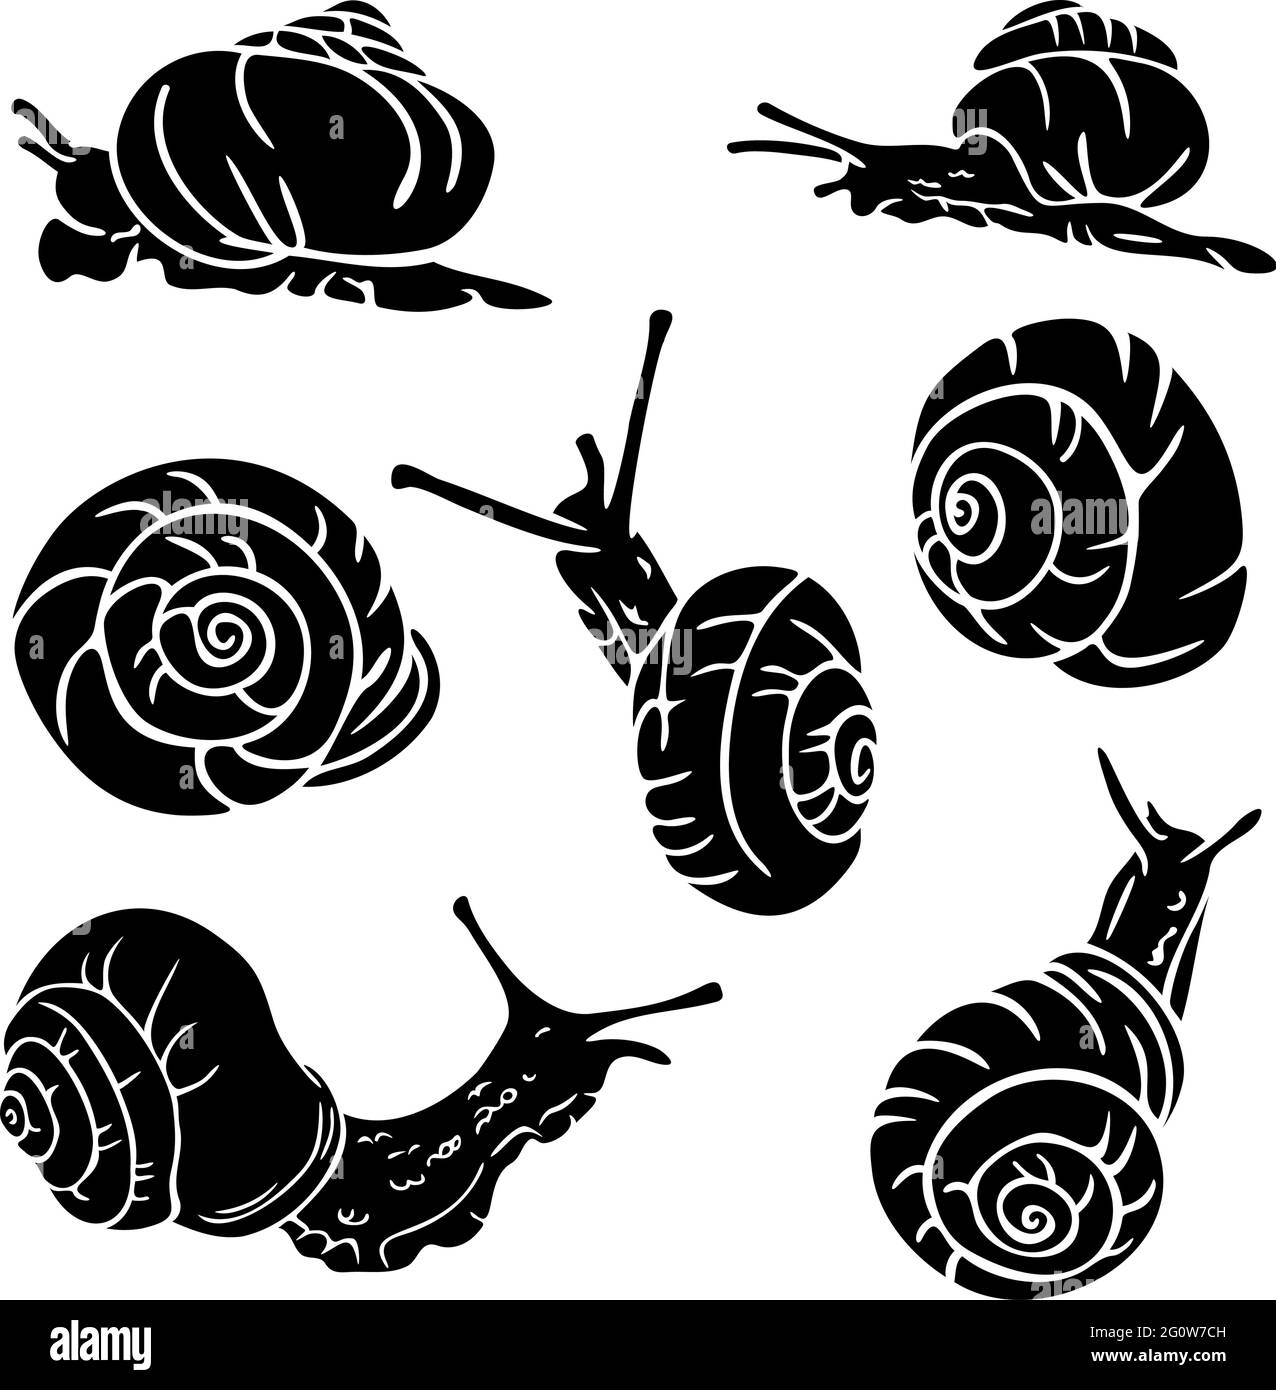 Vector illustration with silhouettes of snails in various postures. Collection of silhouettes of crawling snails and shells. Stock Vector